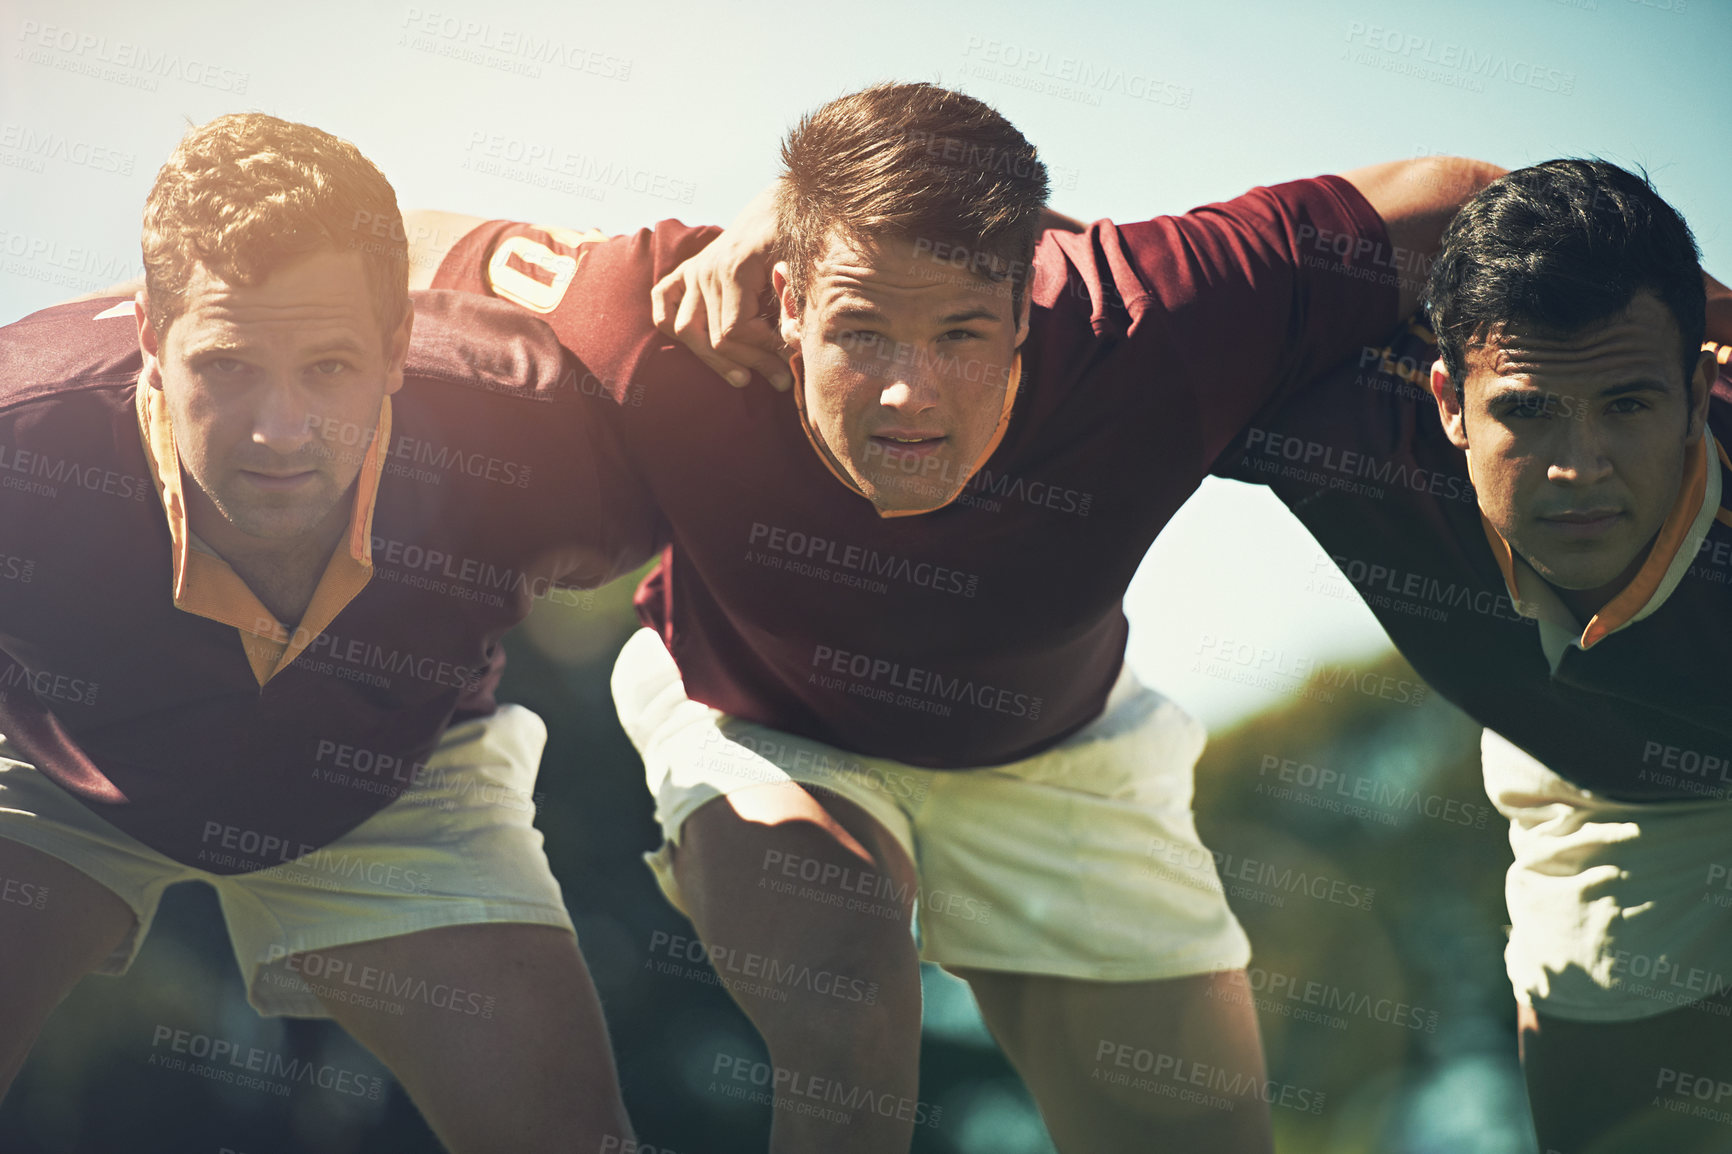 Buy stock photo Rugby team, sports and portrait of men together outdoor on pitch for scrum, teamwork or focus. Male athlete group playing in sport competition, game or training match for fitness, workout or exercise